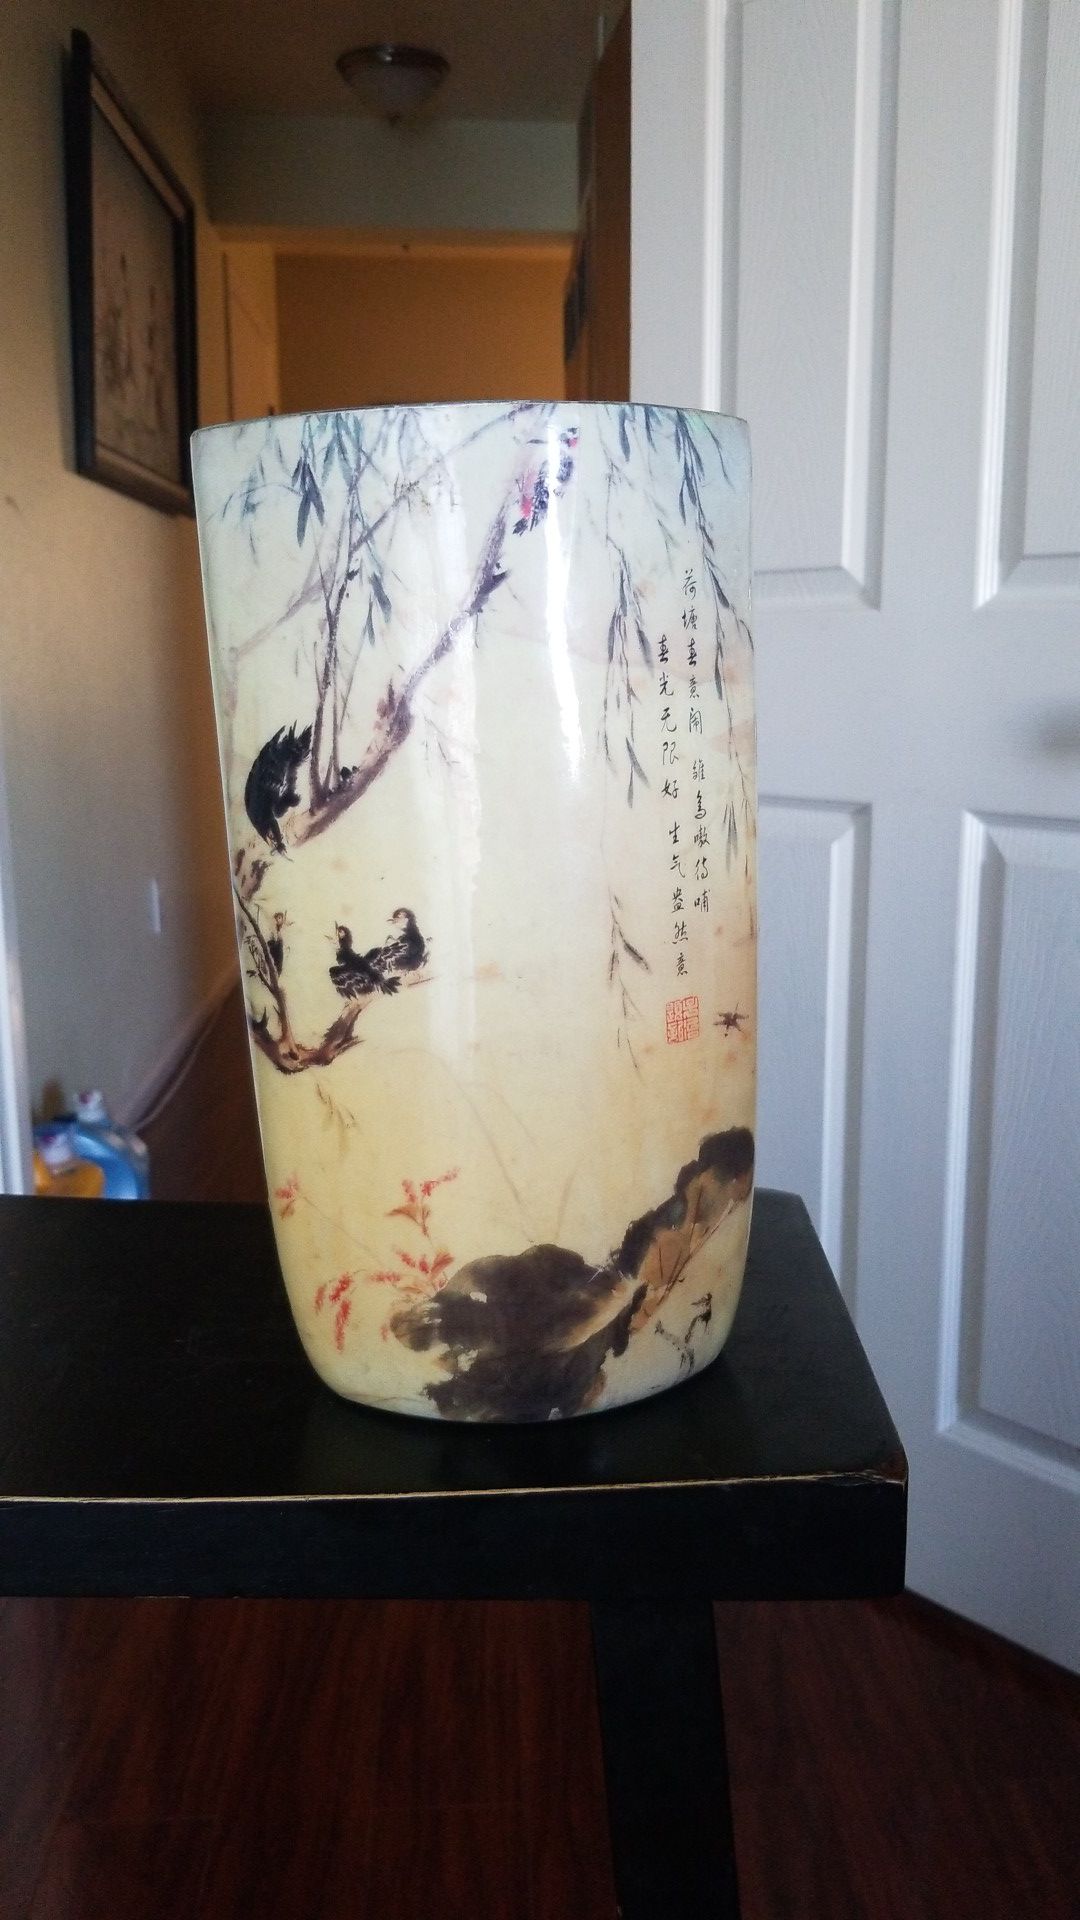 Chinese antique enamel painted porcelain vase. Chinese poem writing on the front and stamped. Very colorful with mama bird and her chicks.